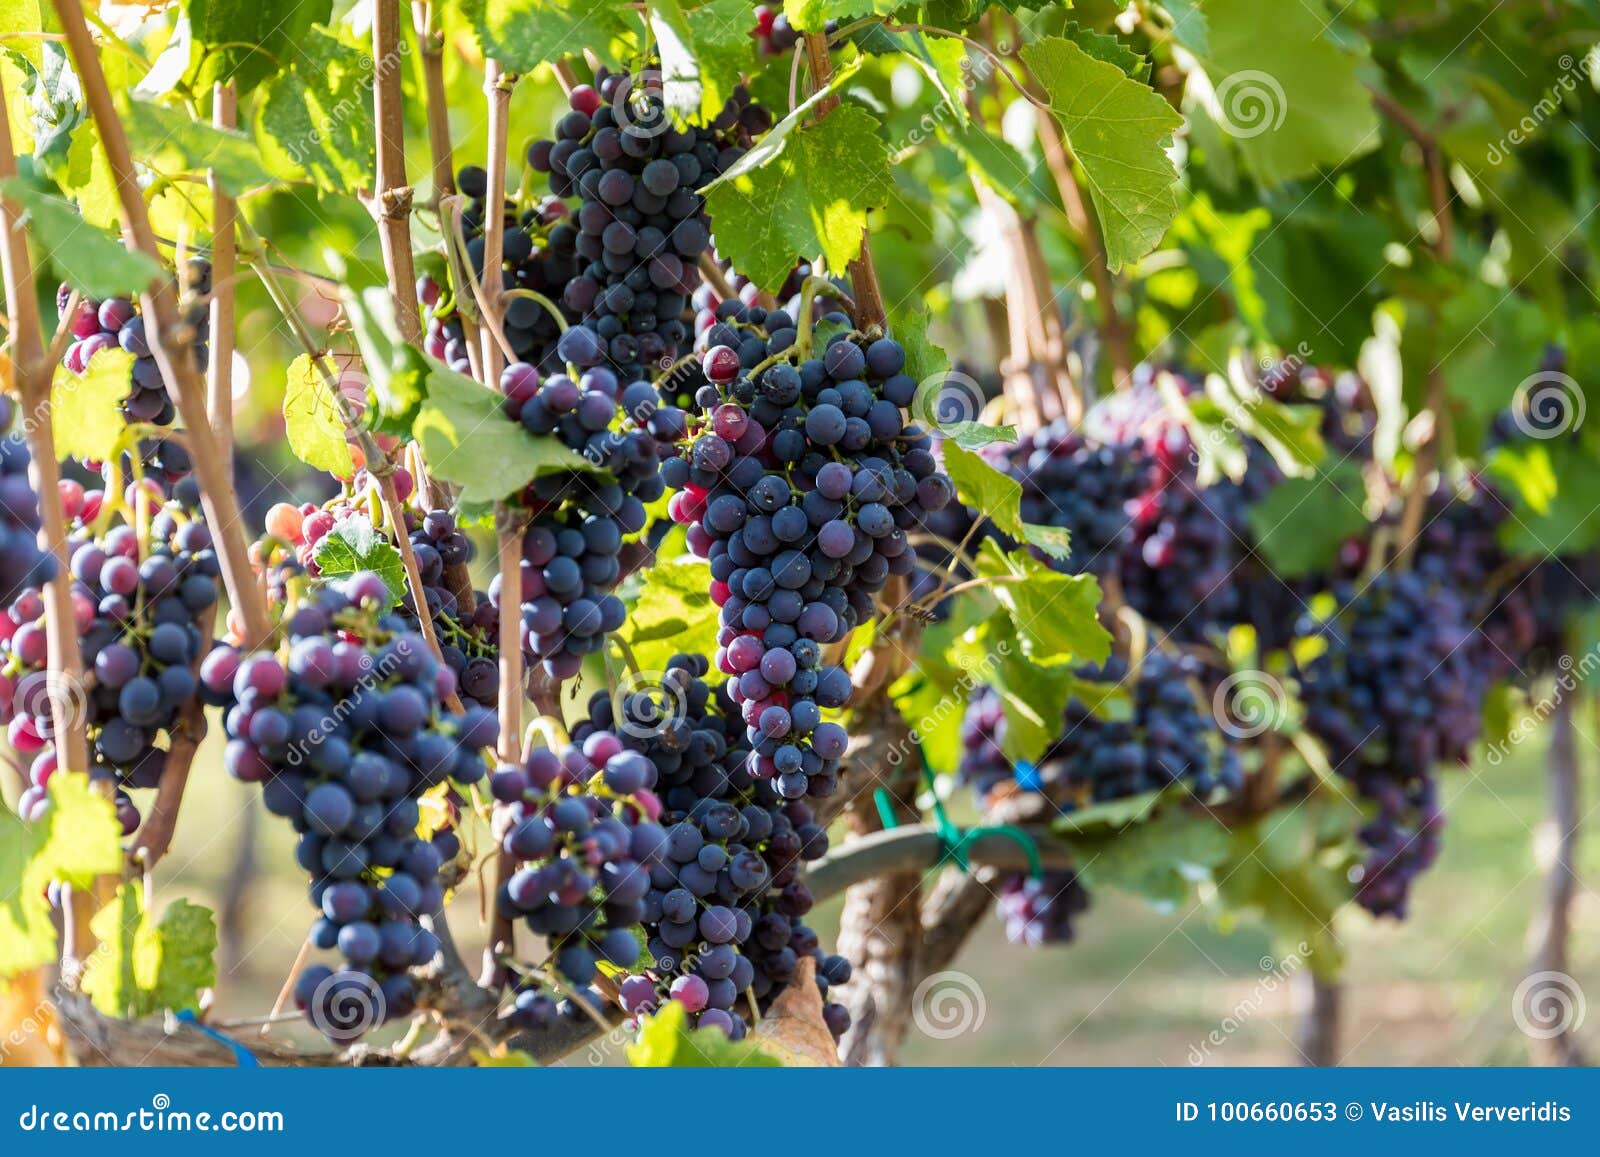 large bunche of red wine grapes hang from a vine.